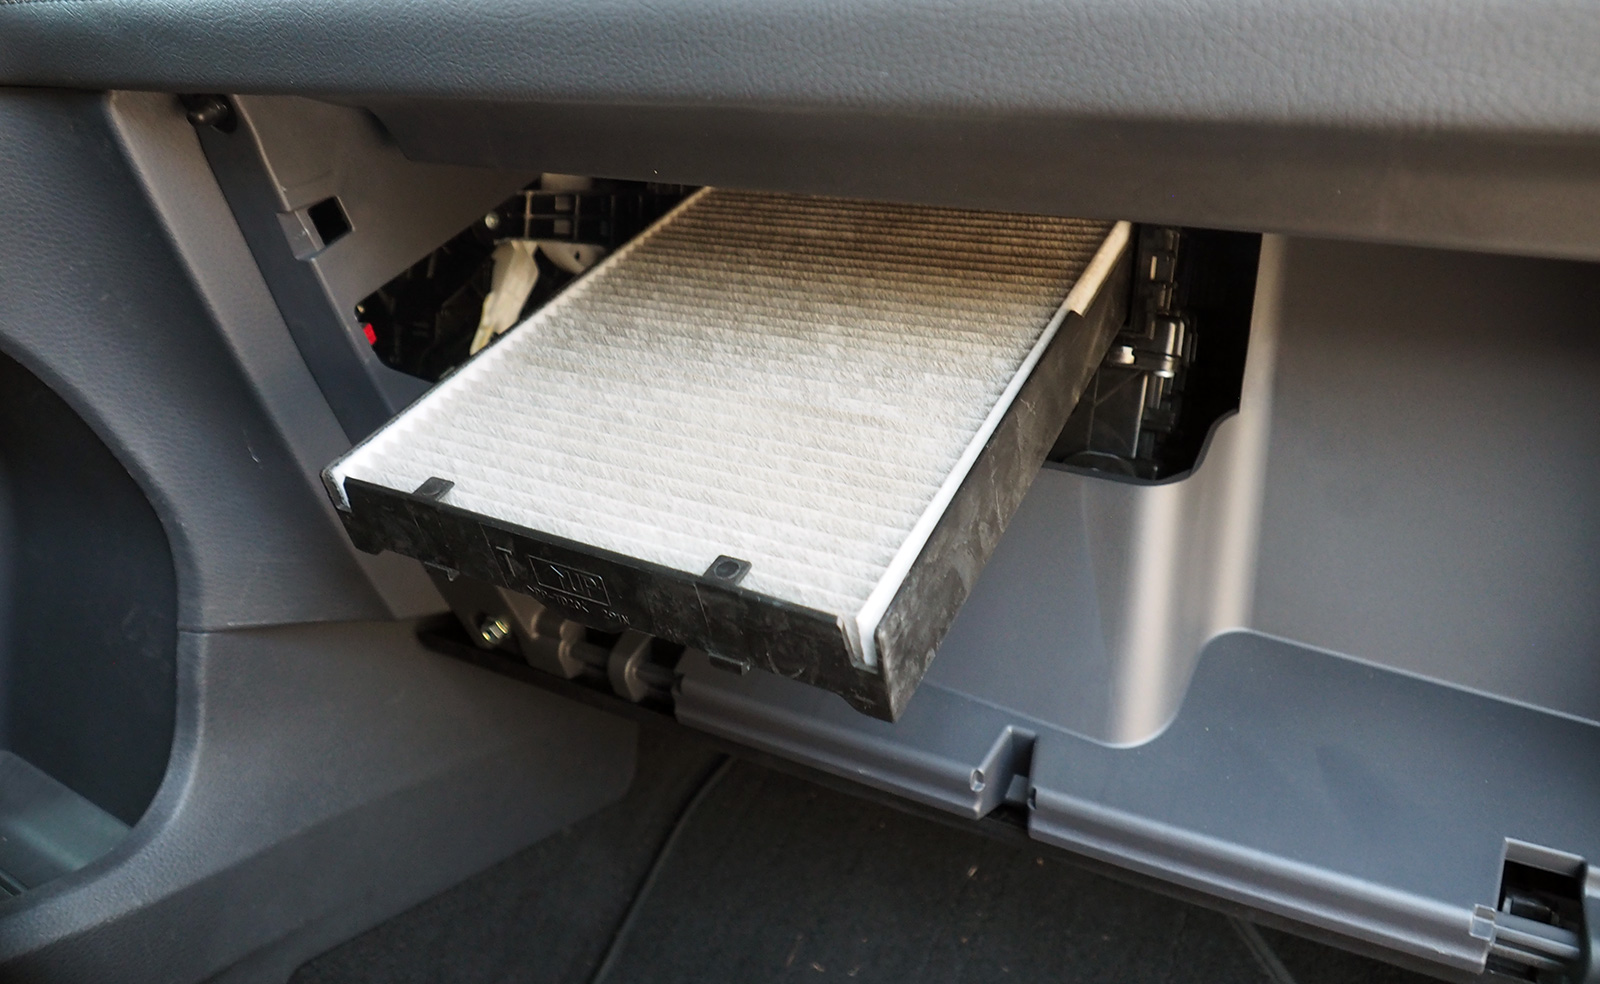 Where Is My Cabin Air Filter Located and When Should I Change It?